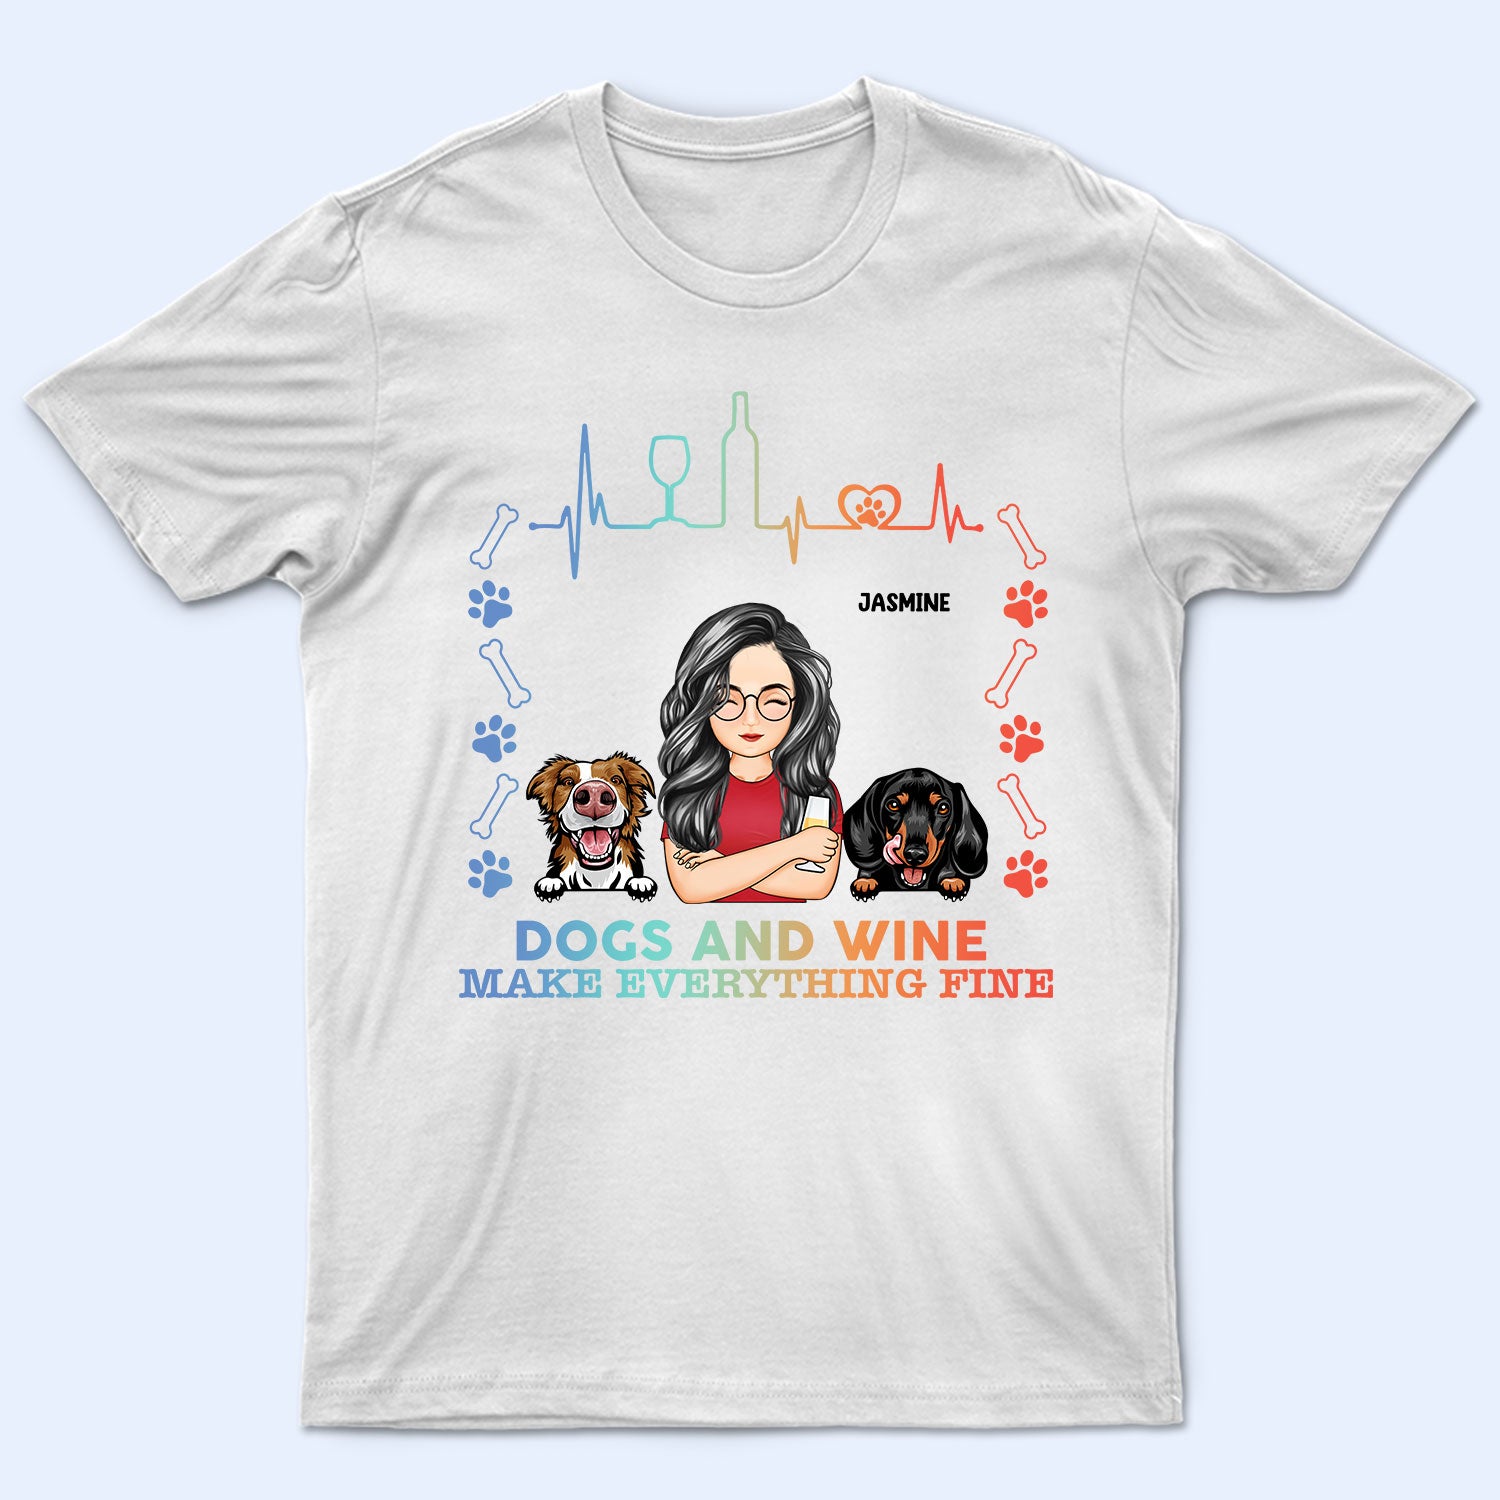 Dogs And Wine Make Everything Fine - Gift For Dog Lovers - Personalized T Shirt